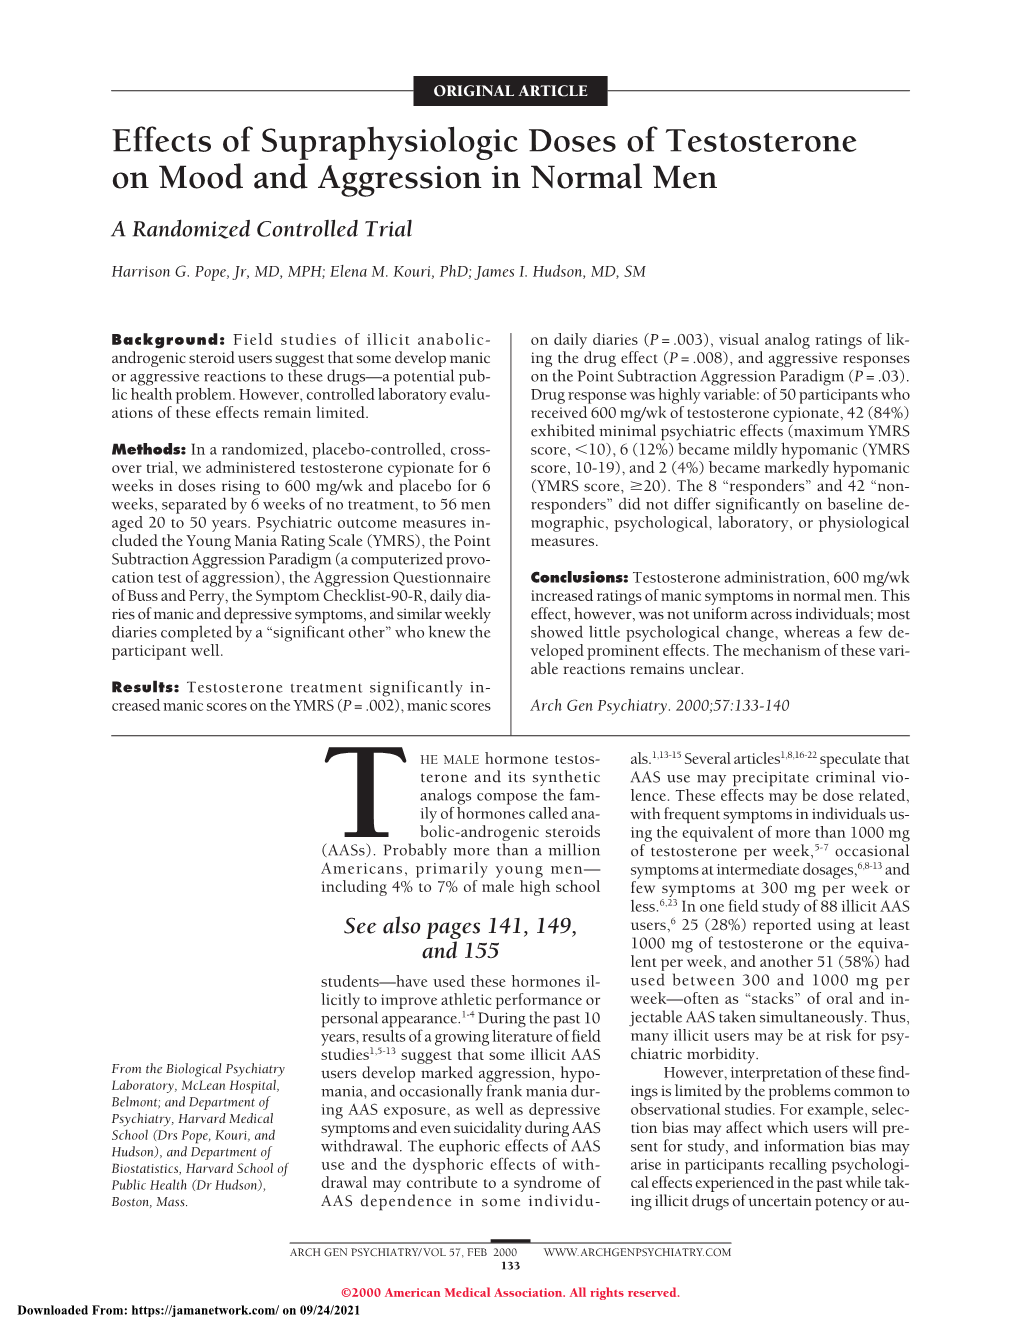 Effects of Supraphysiologic Doses of Testosterone on Mood and Aggression in Normal Men a Randomized Controlled Trial